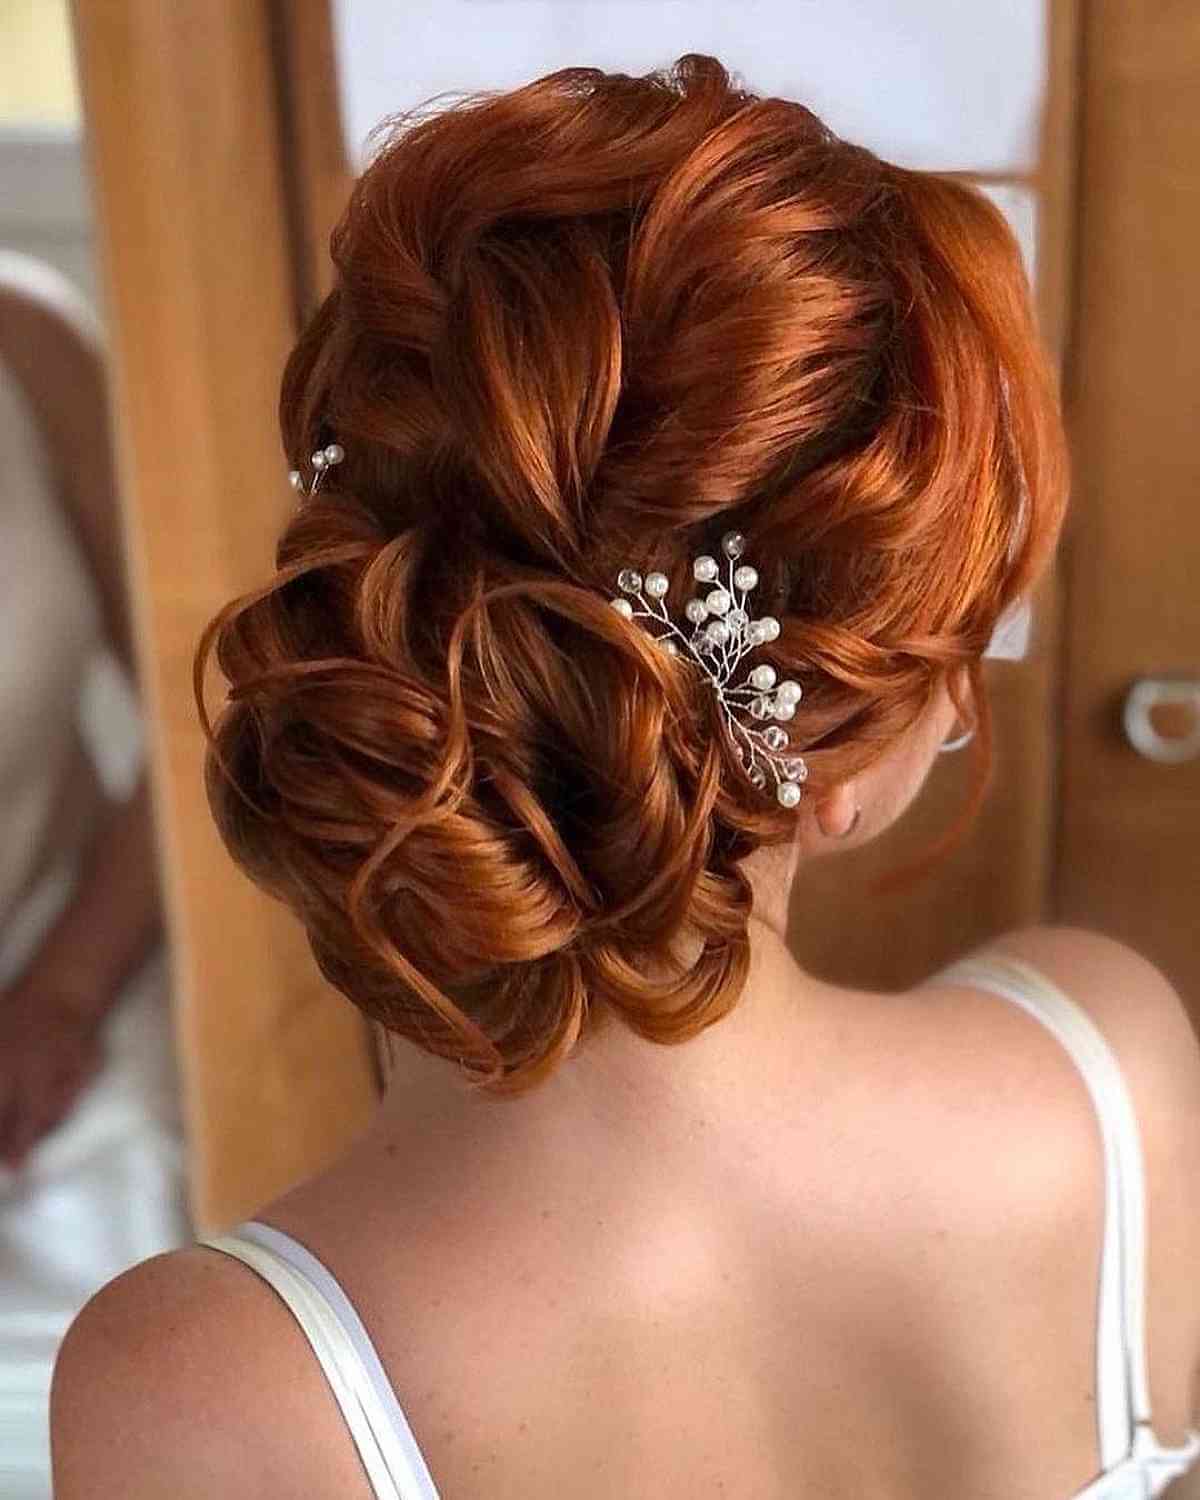 The Flowing Low Updo 